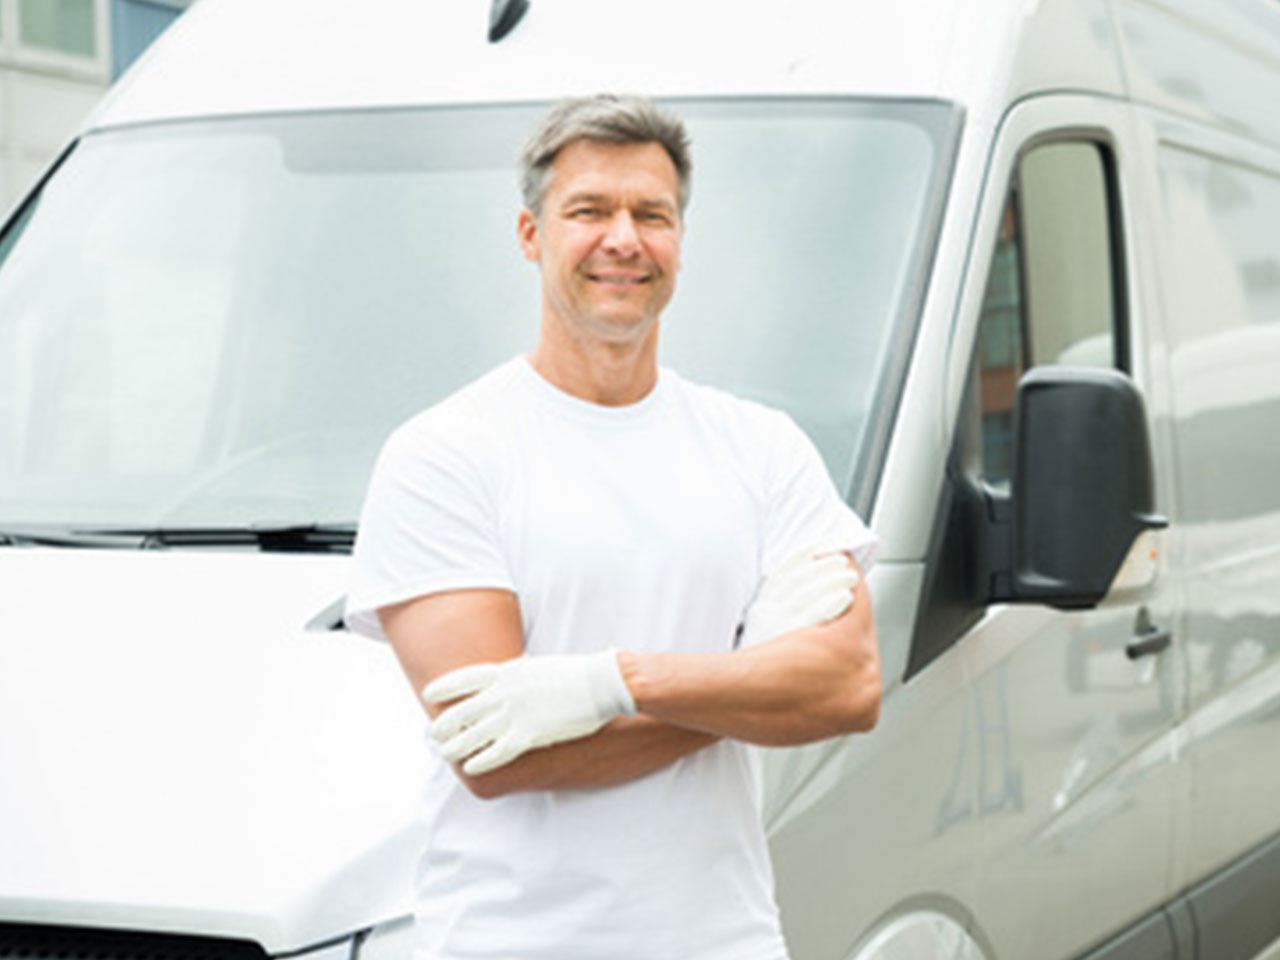 2. Painter-With-Arms-Crossed-In-Front-Of-Van